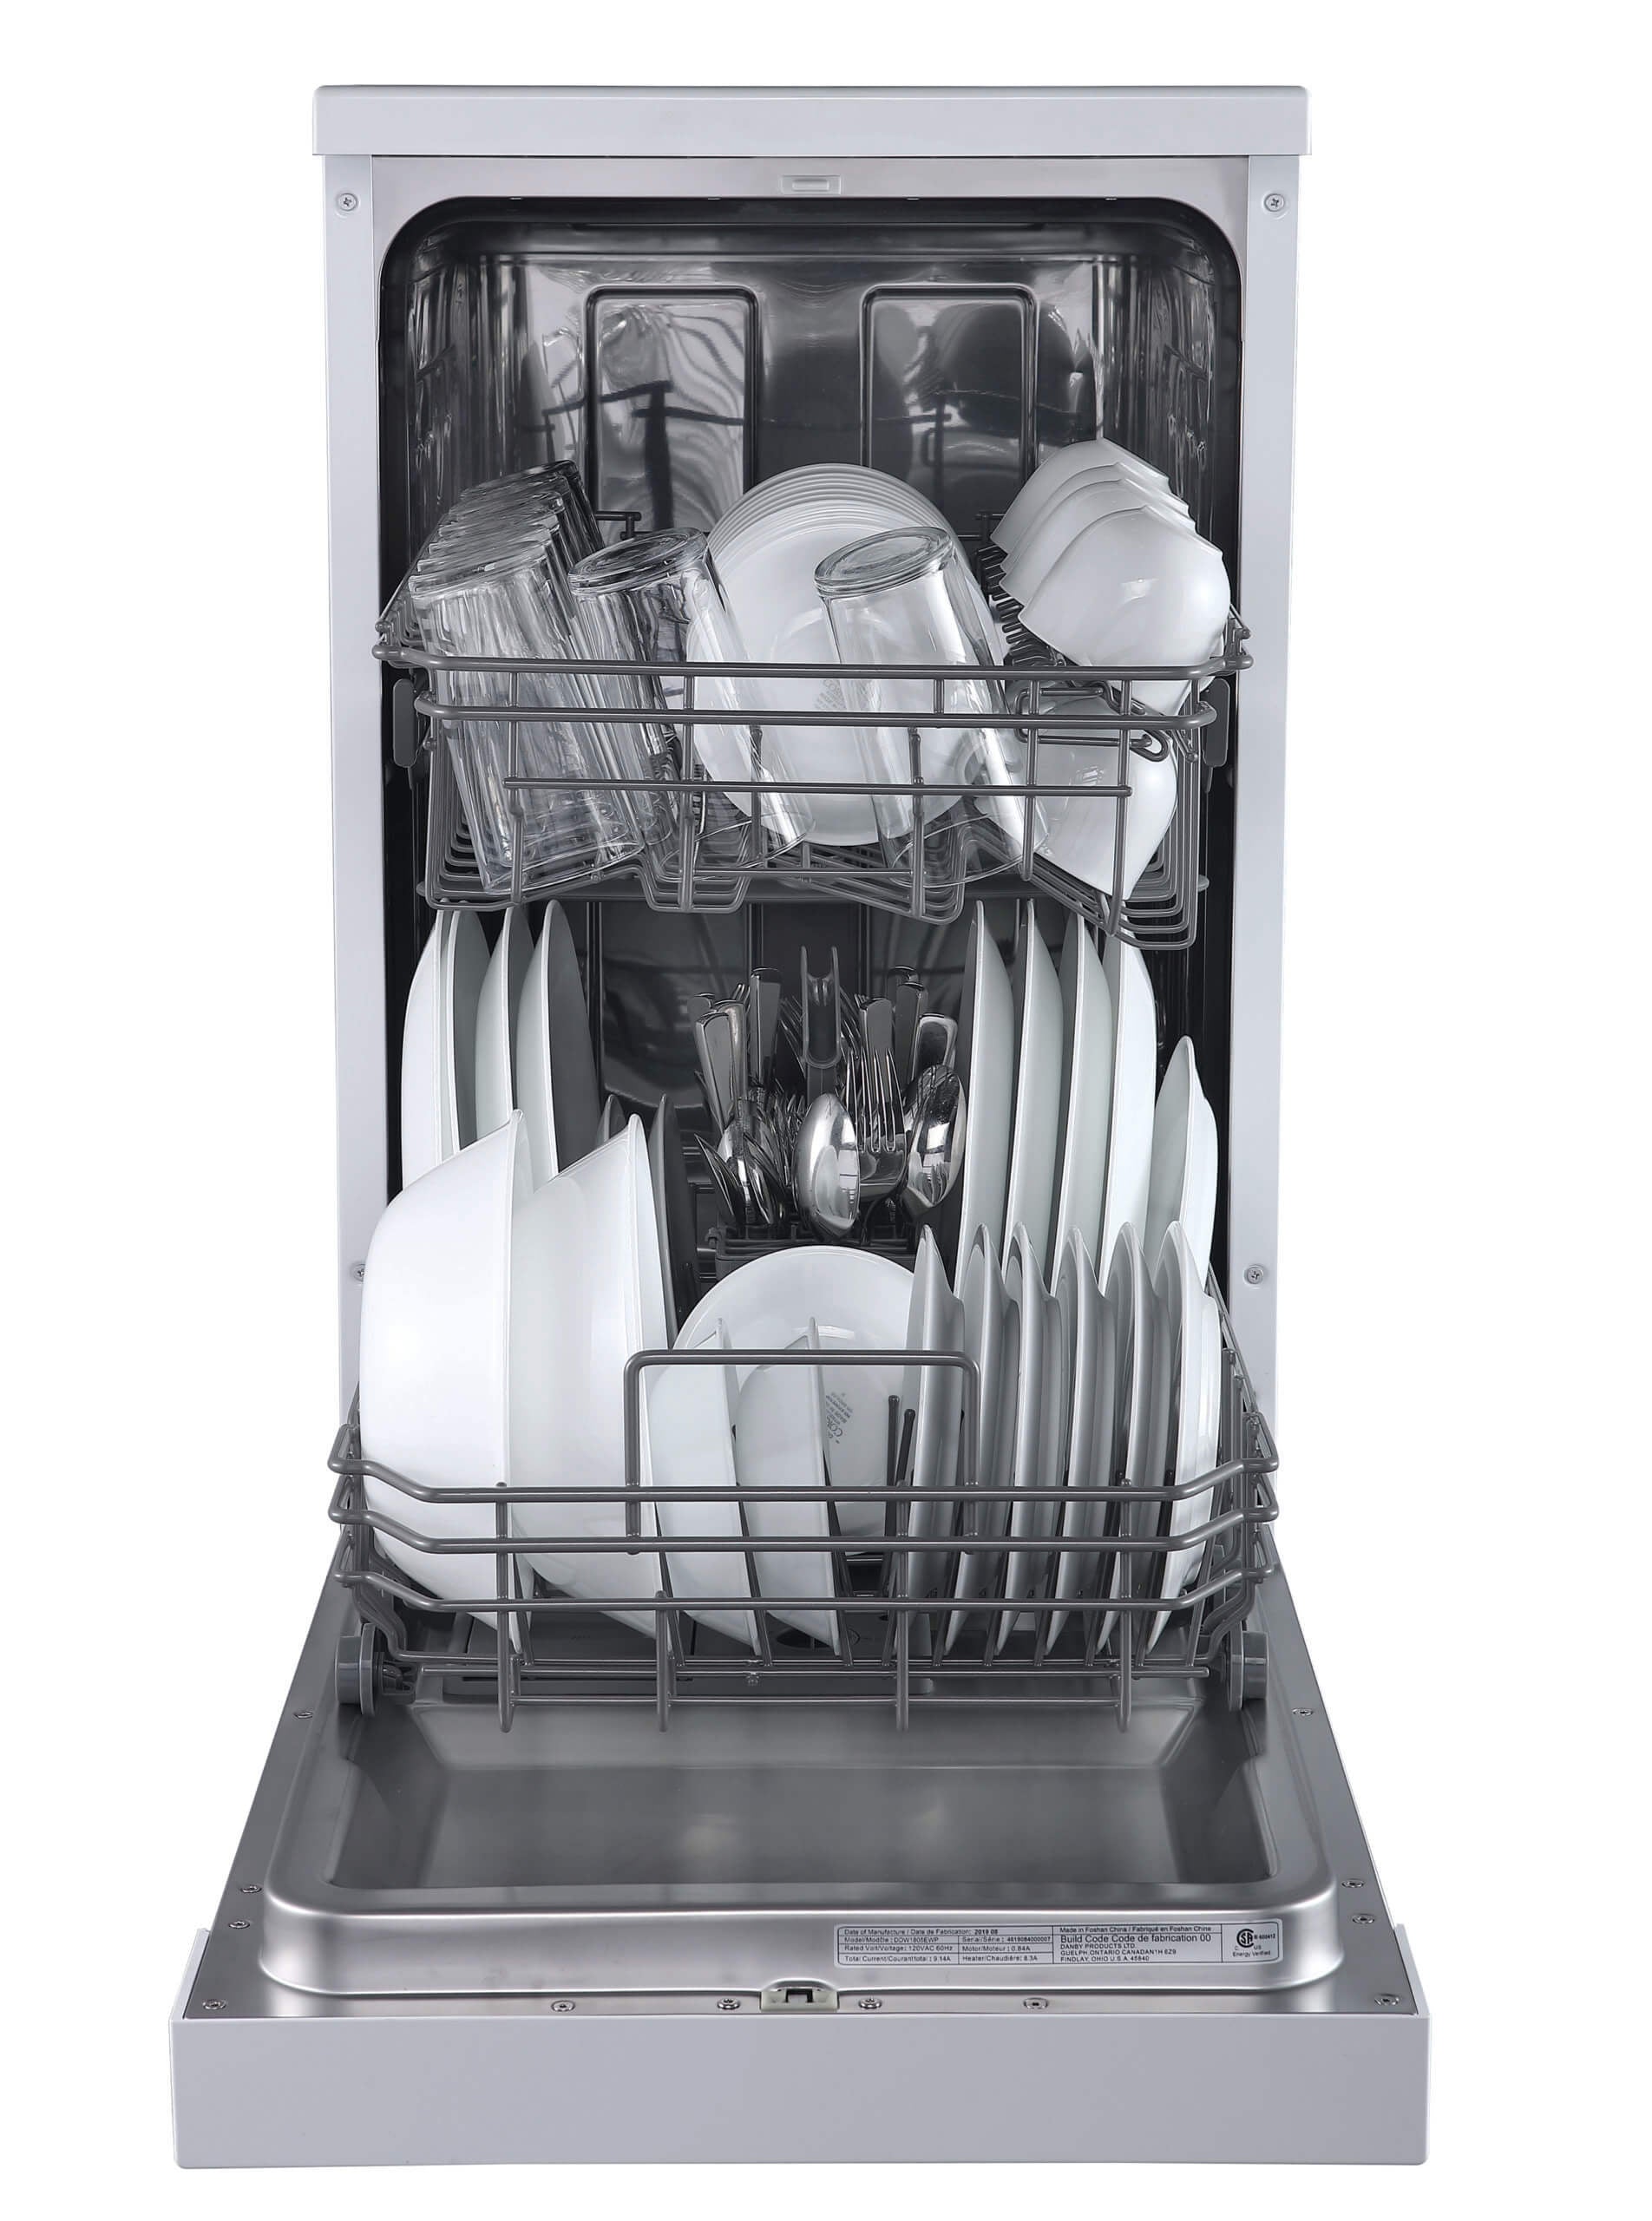 Danby DDW18D1ESS 18-inch Built-In Dishwasher, Stainless Steel